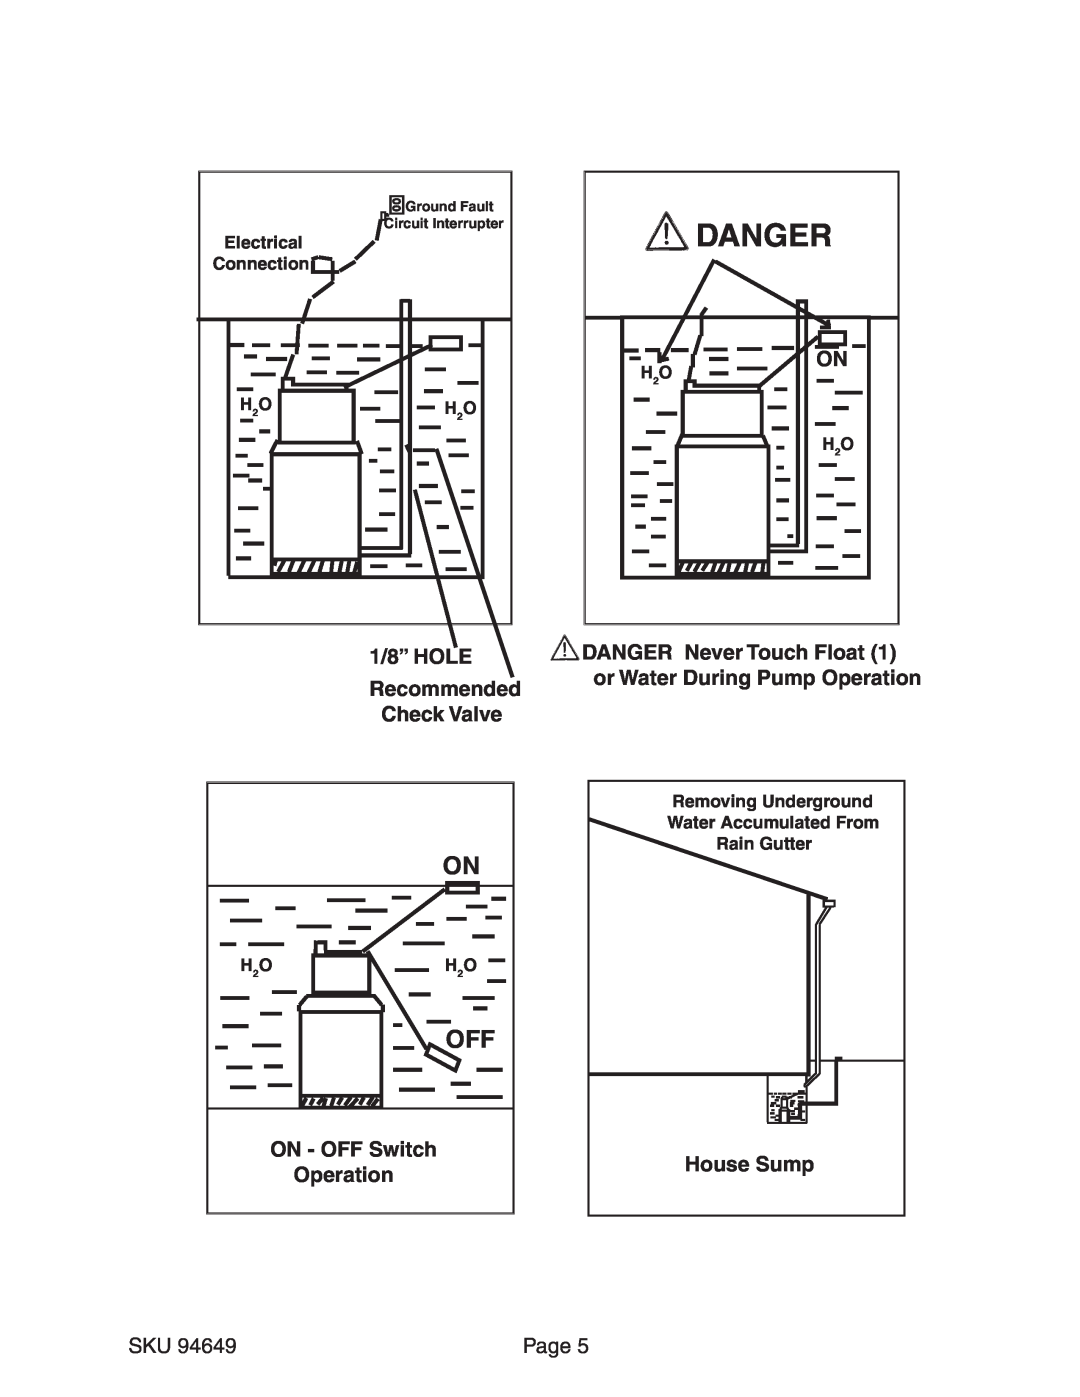 Chicago Electric 94649 Danger, Recommended, Check Valve, Page, Electrical, Connection, H 2O, Removing Underground 